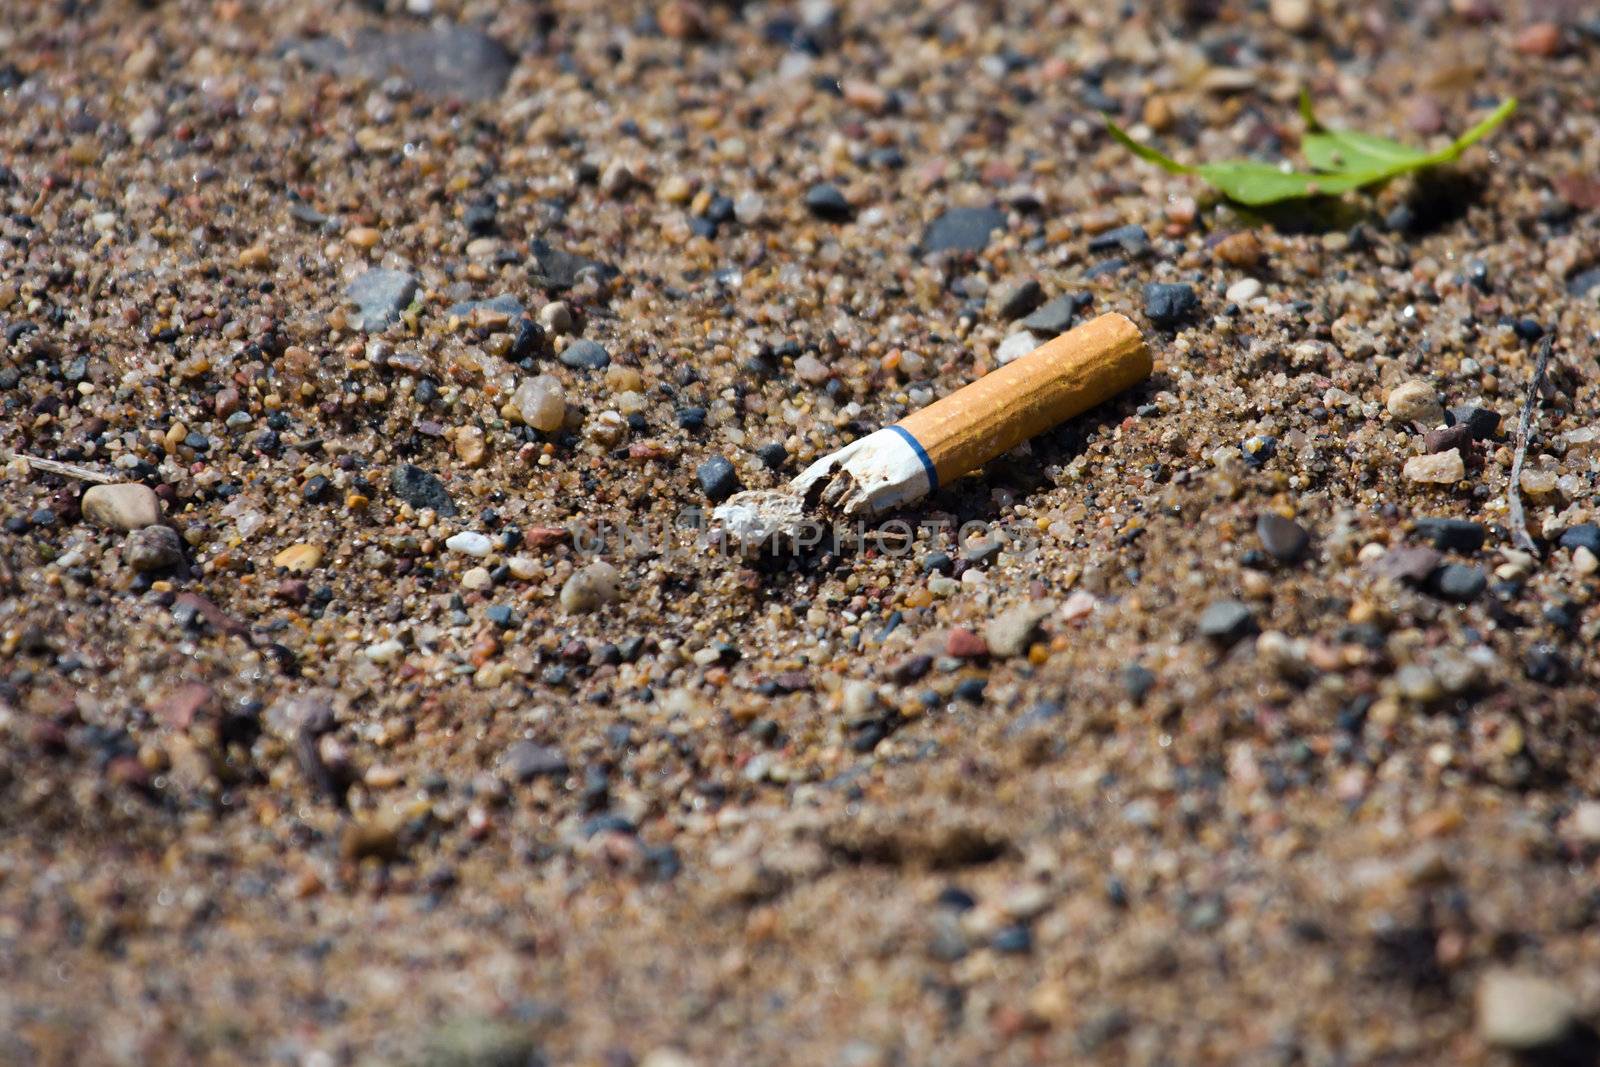 Smoked cigarette smashed and littered on the ground.